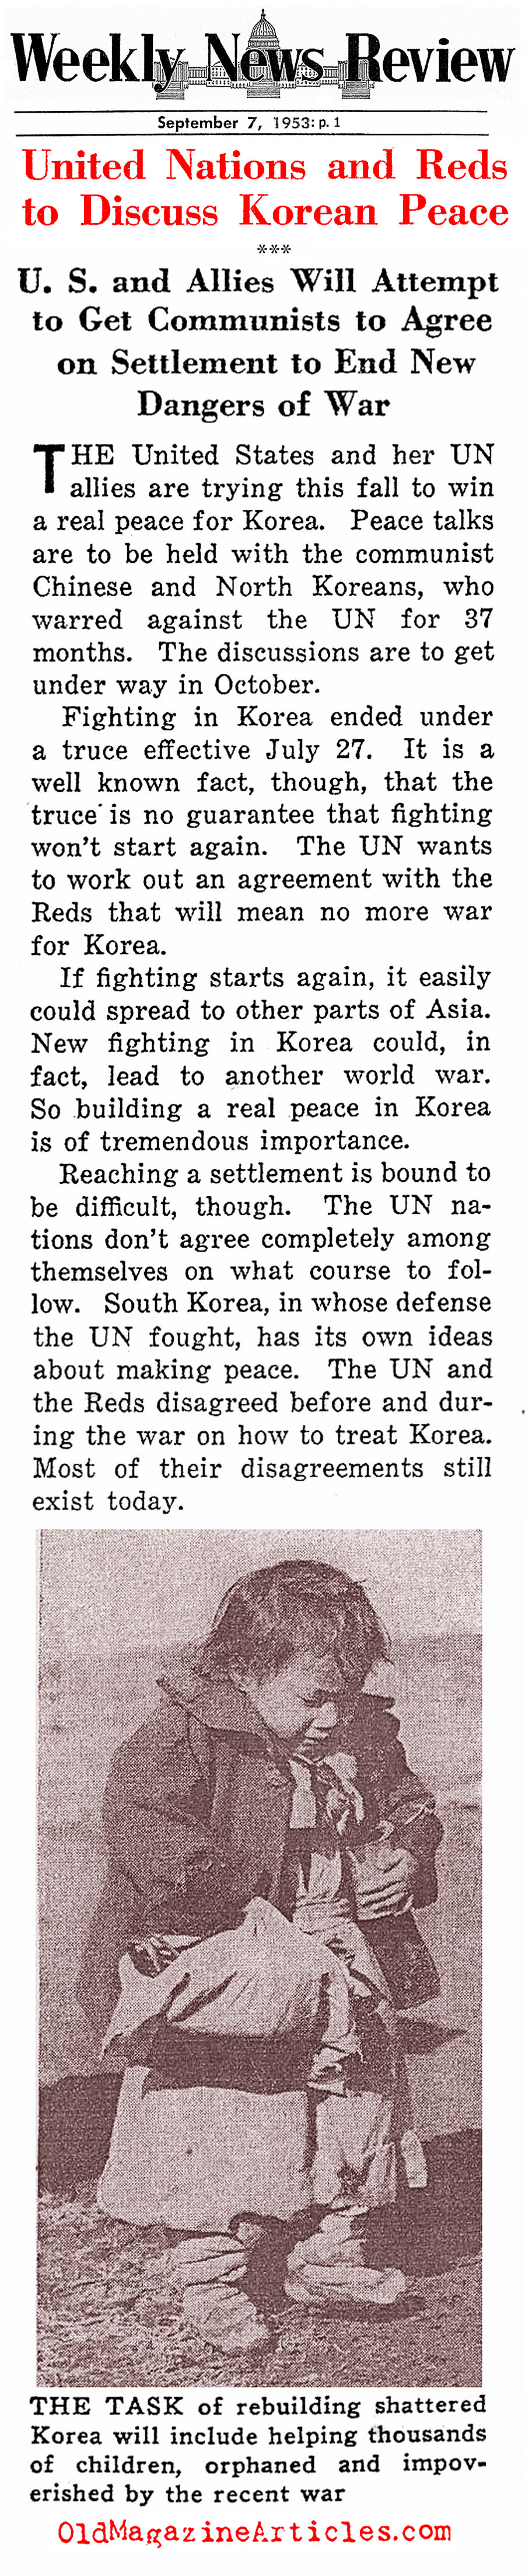 Fingers Crossed for a Lasting Peace (Weekly News Review, 1953)